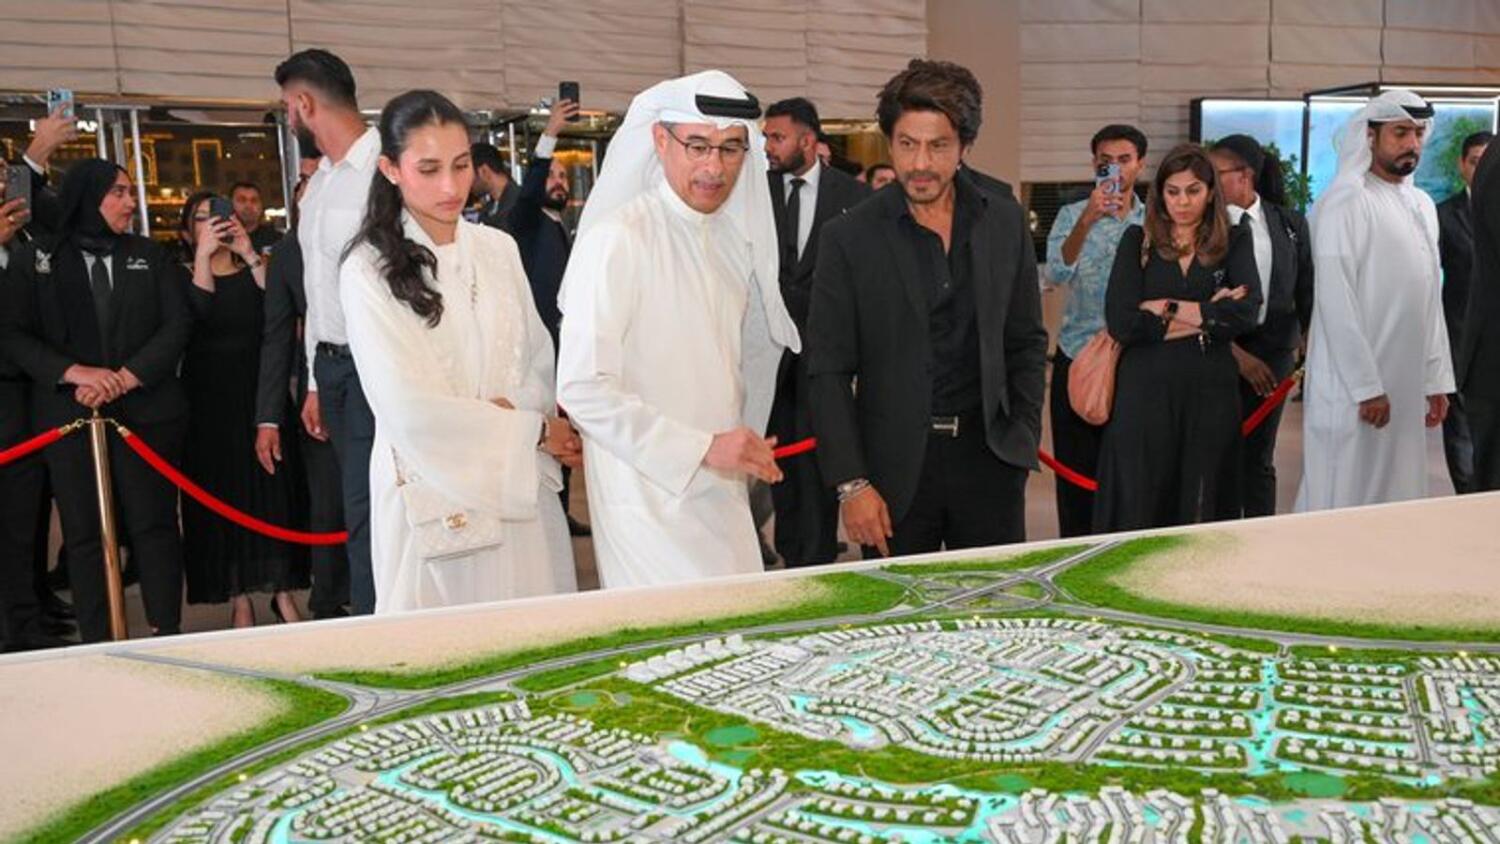 The Oasis by Emaar’ will house more than 7,000 large mansions and villas surrounded by water canals, lakes and parks.